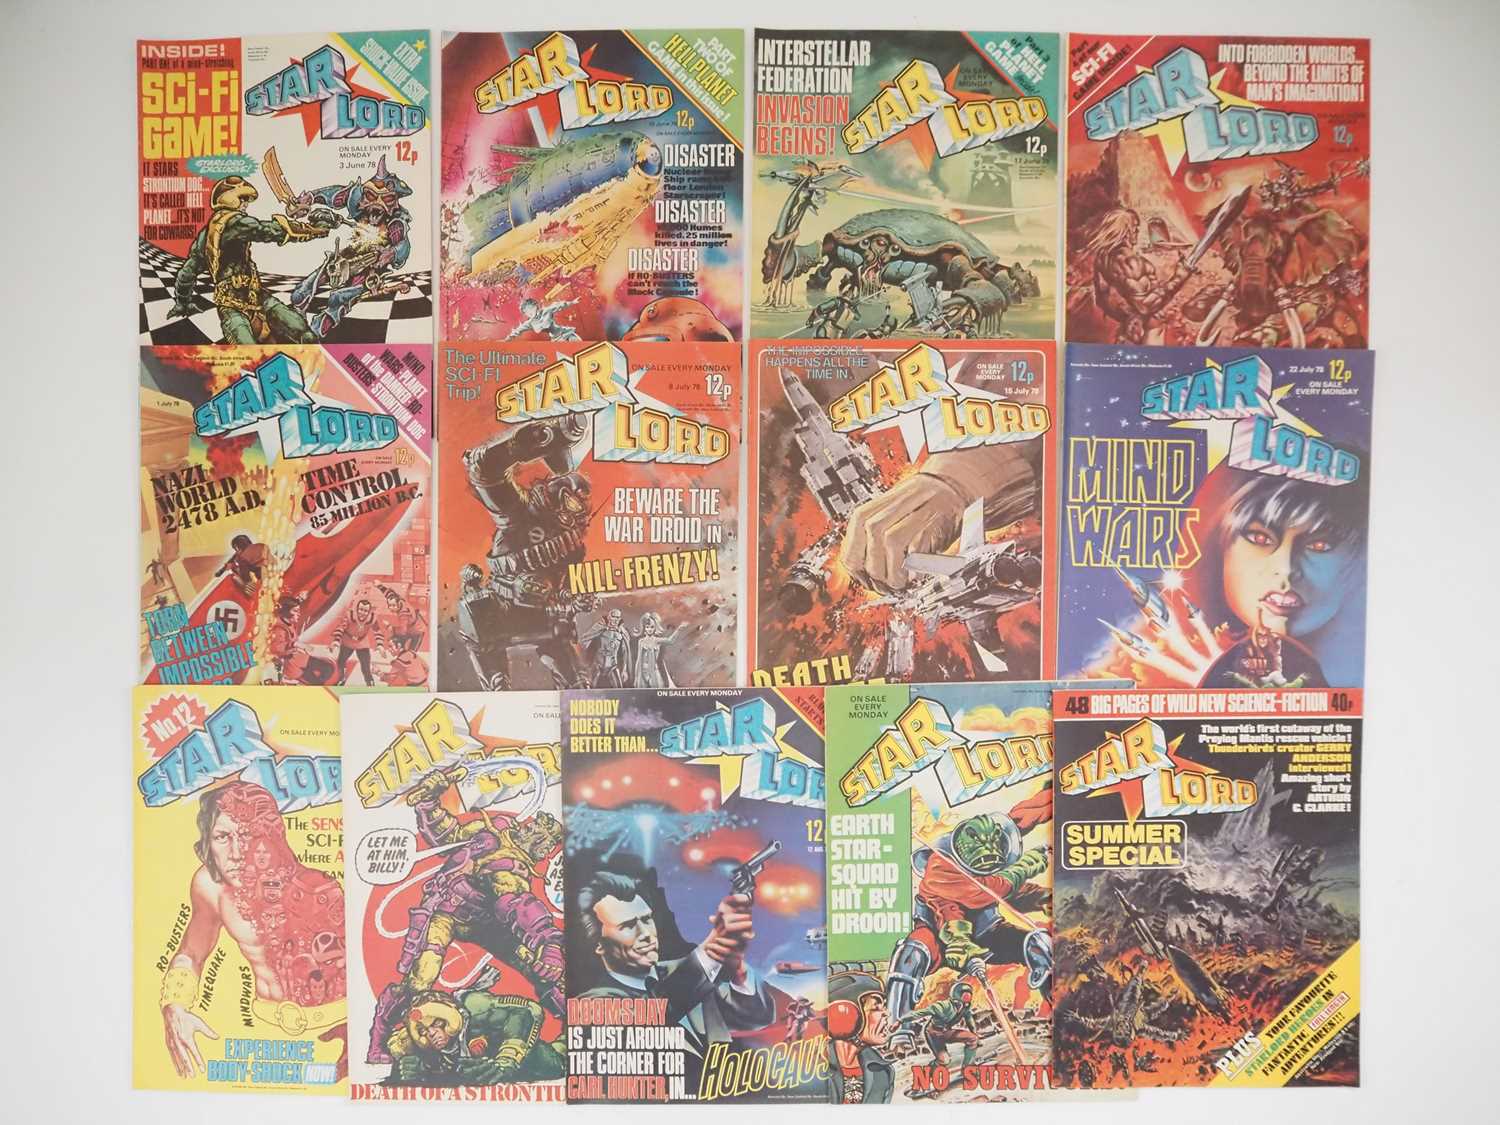 STAR LORD #4 to 15 + SUMMER SPECIAL (13 in Lot) - (1978 - IPC) - Stories include Strontium Dog, Ro-